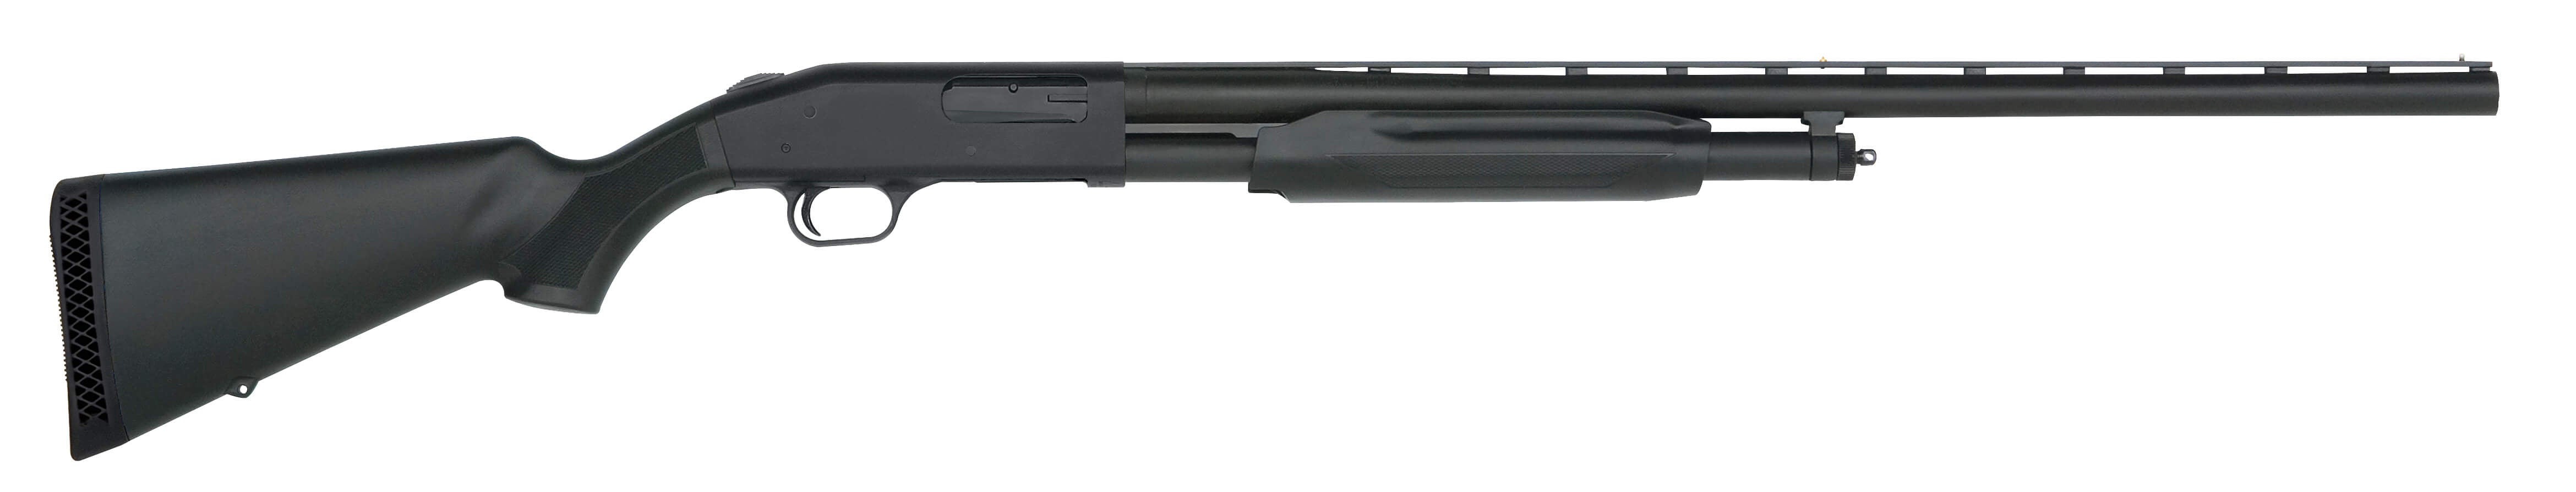 Mossberg 500 Hunting All Purpose Field - Synthetic